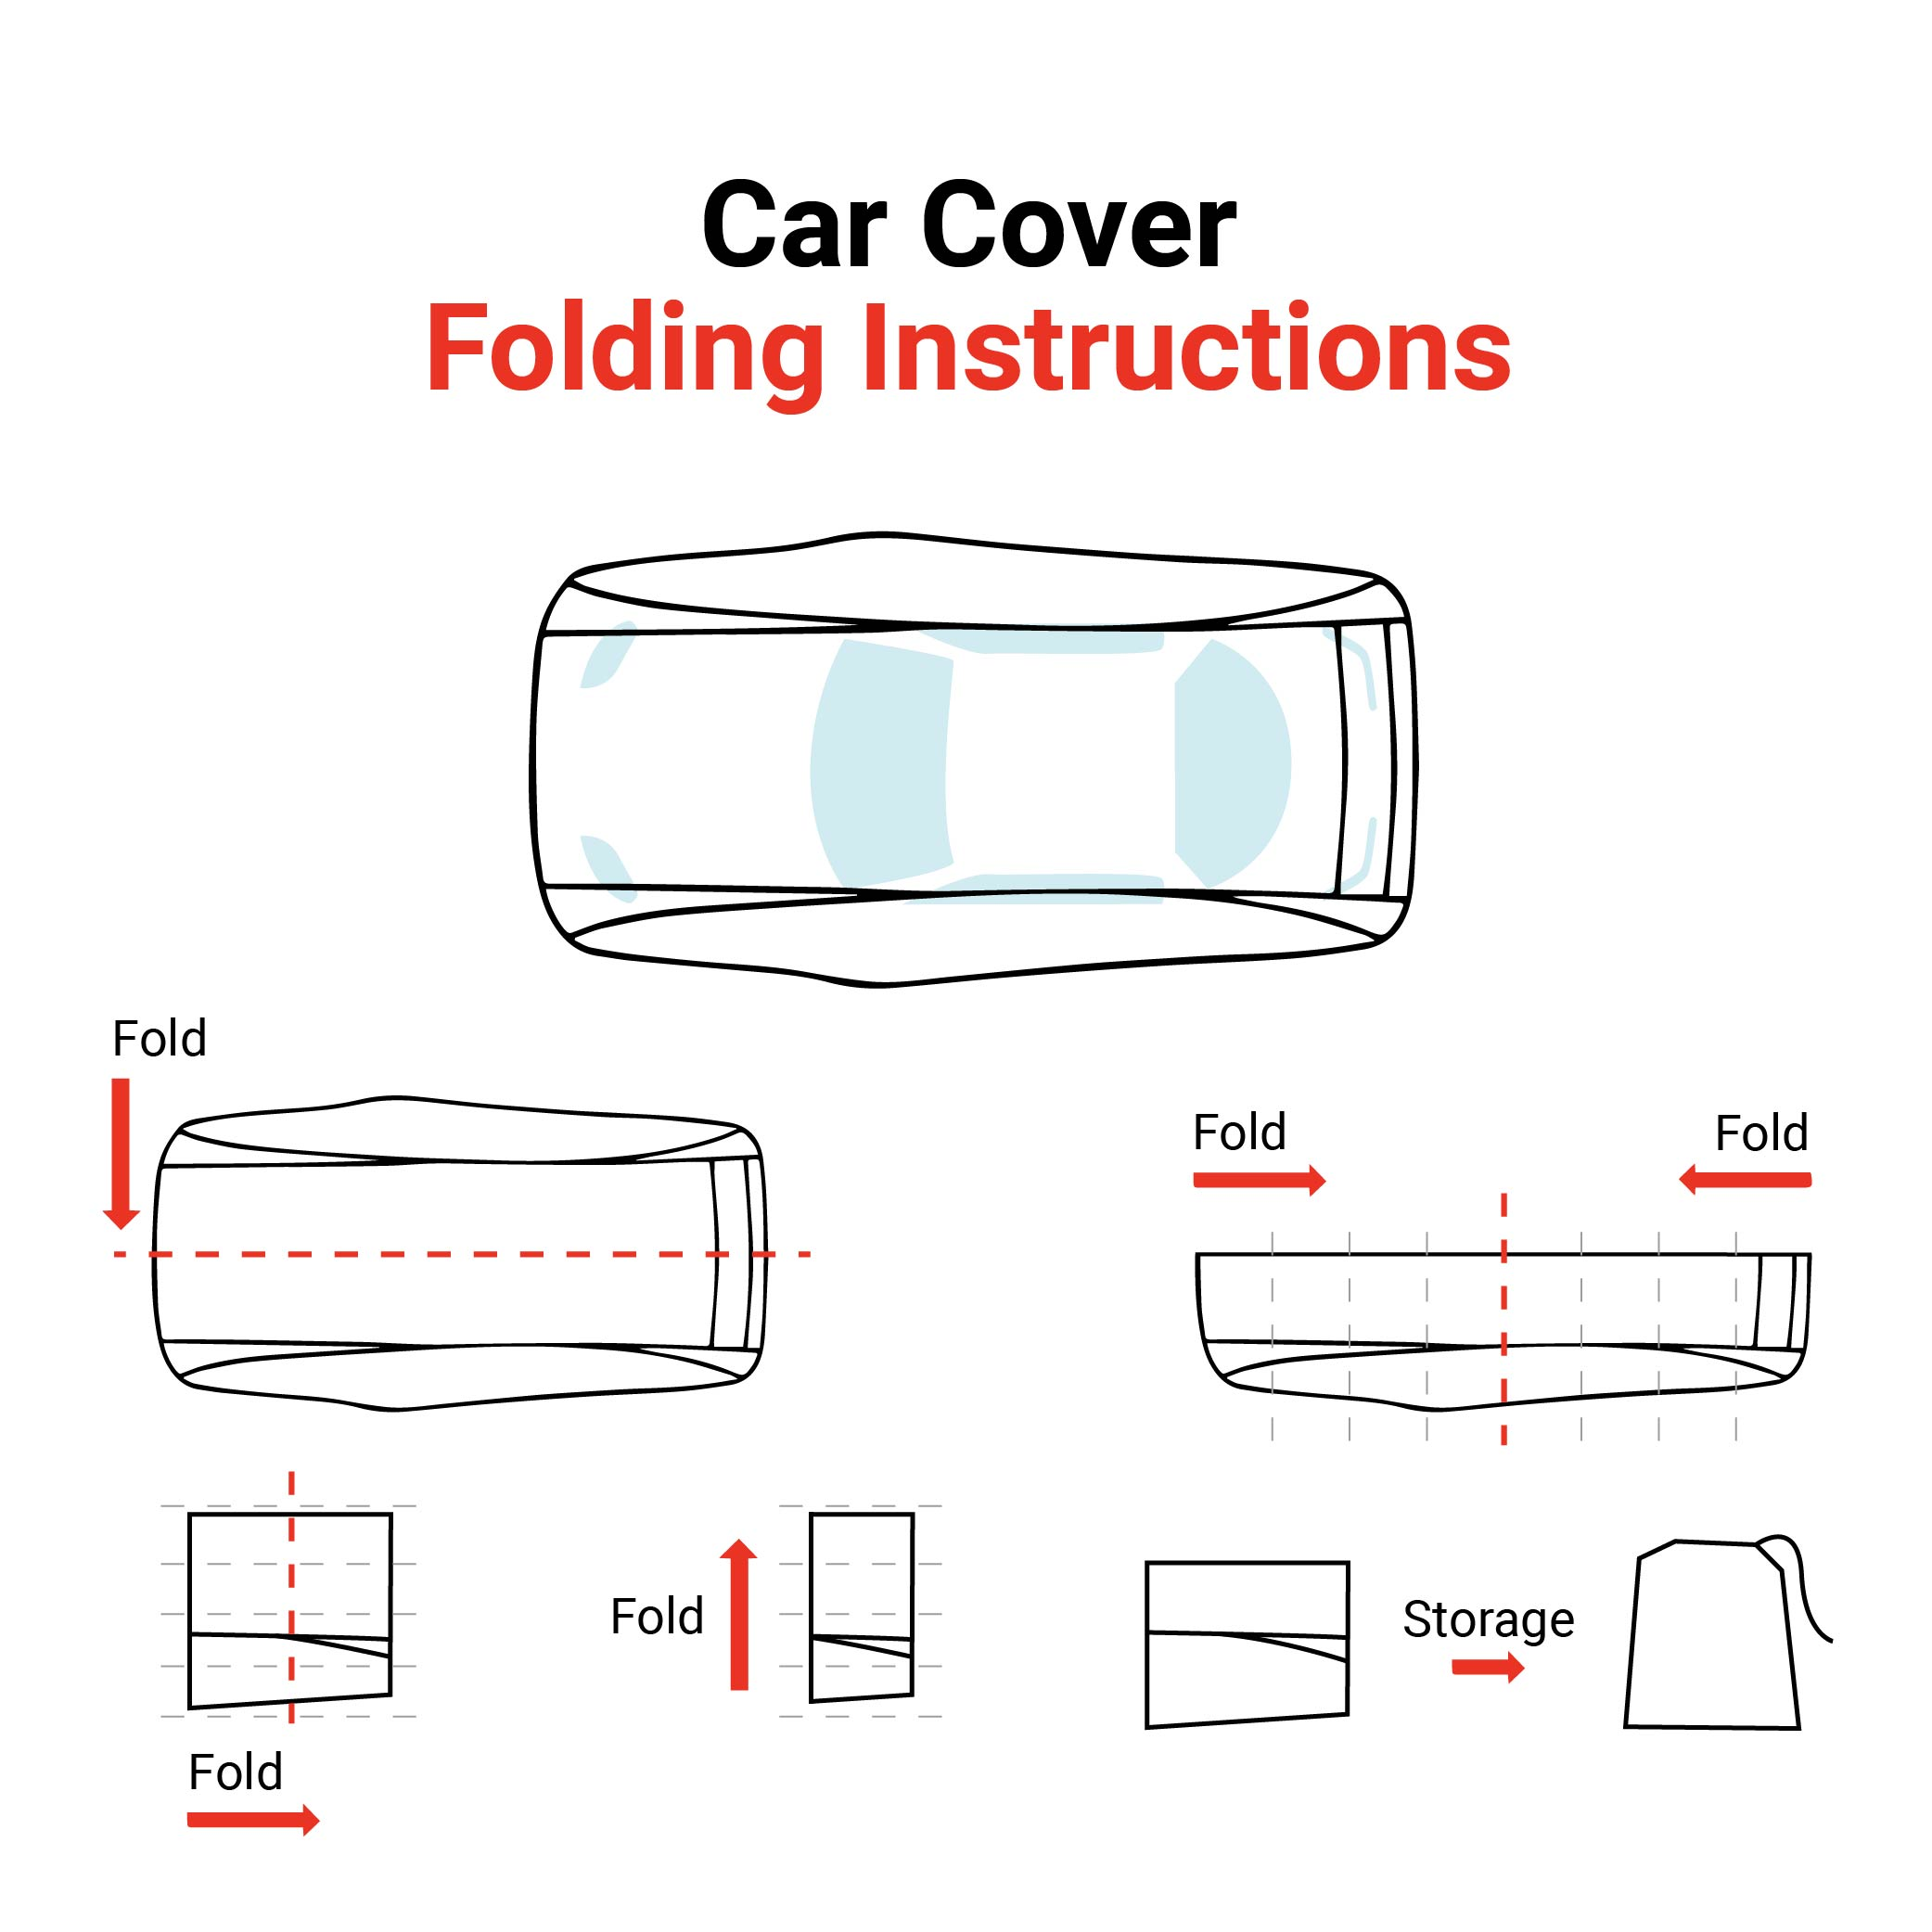 TATA Altroz Car Body Cover with Antenna Cover, Mirror Pockets and 100% Water Repellent (K-Series)